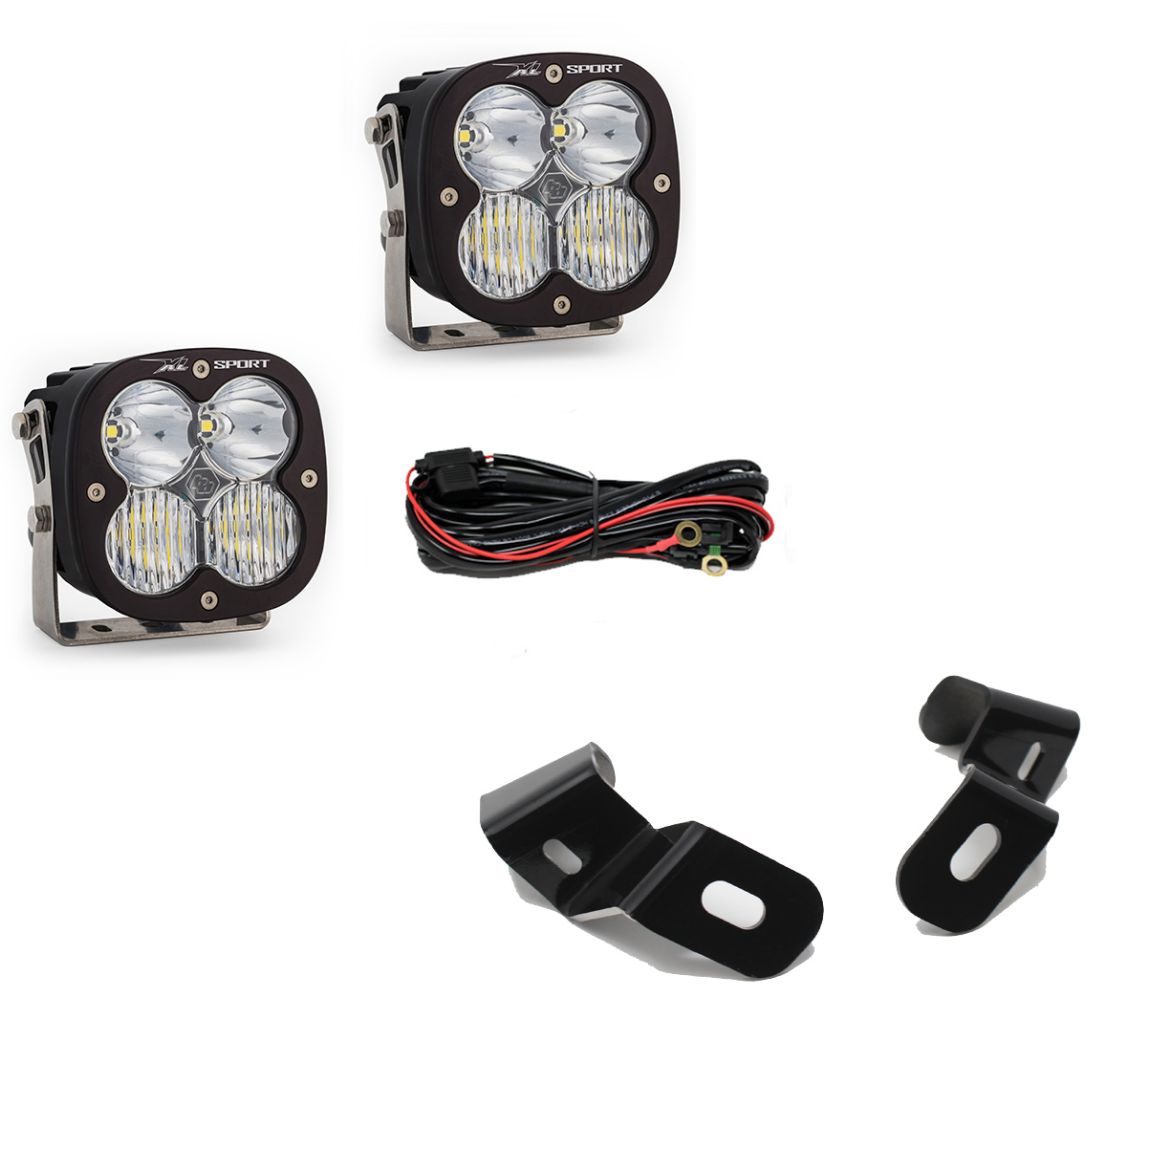 Picture of Dodge Ram LED Light Pods For Ram 2500/3500 19-On A-Pillar Kits XL Sport Driving Combo Baja Designs